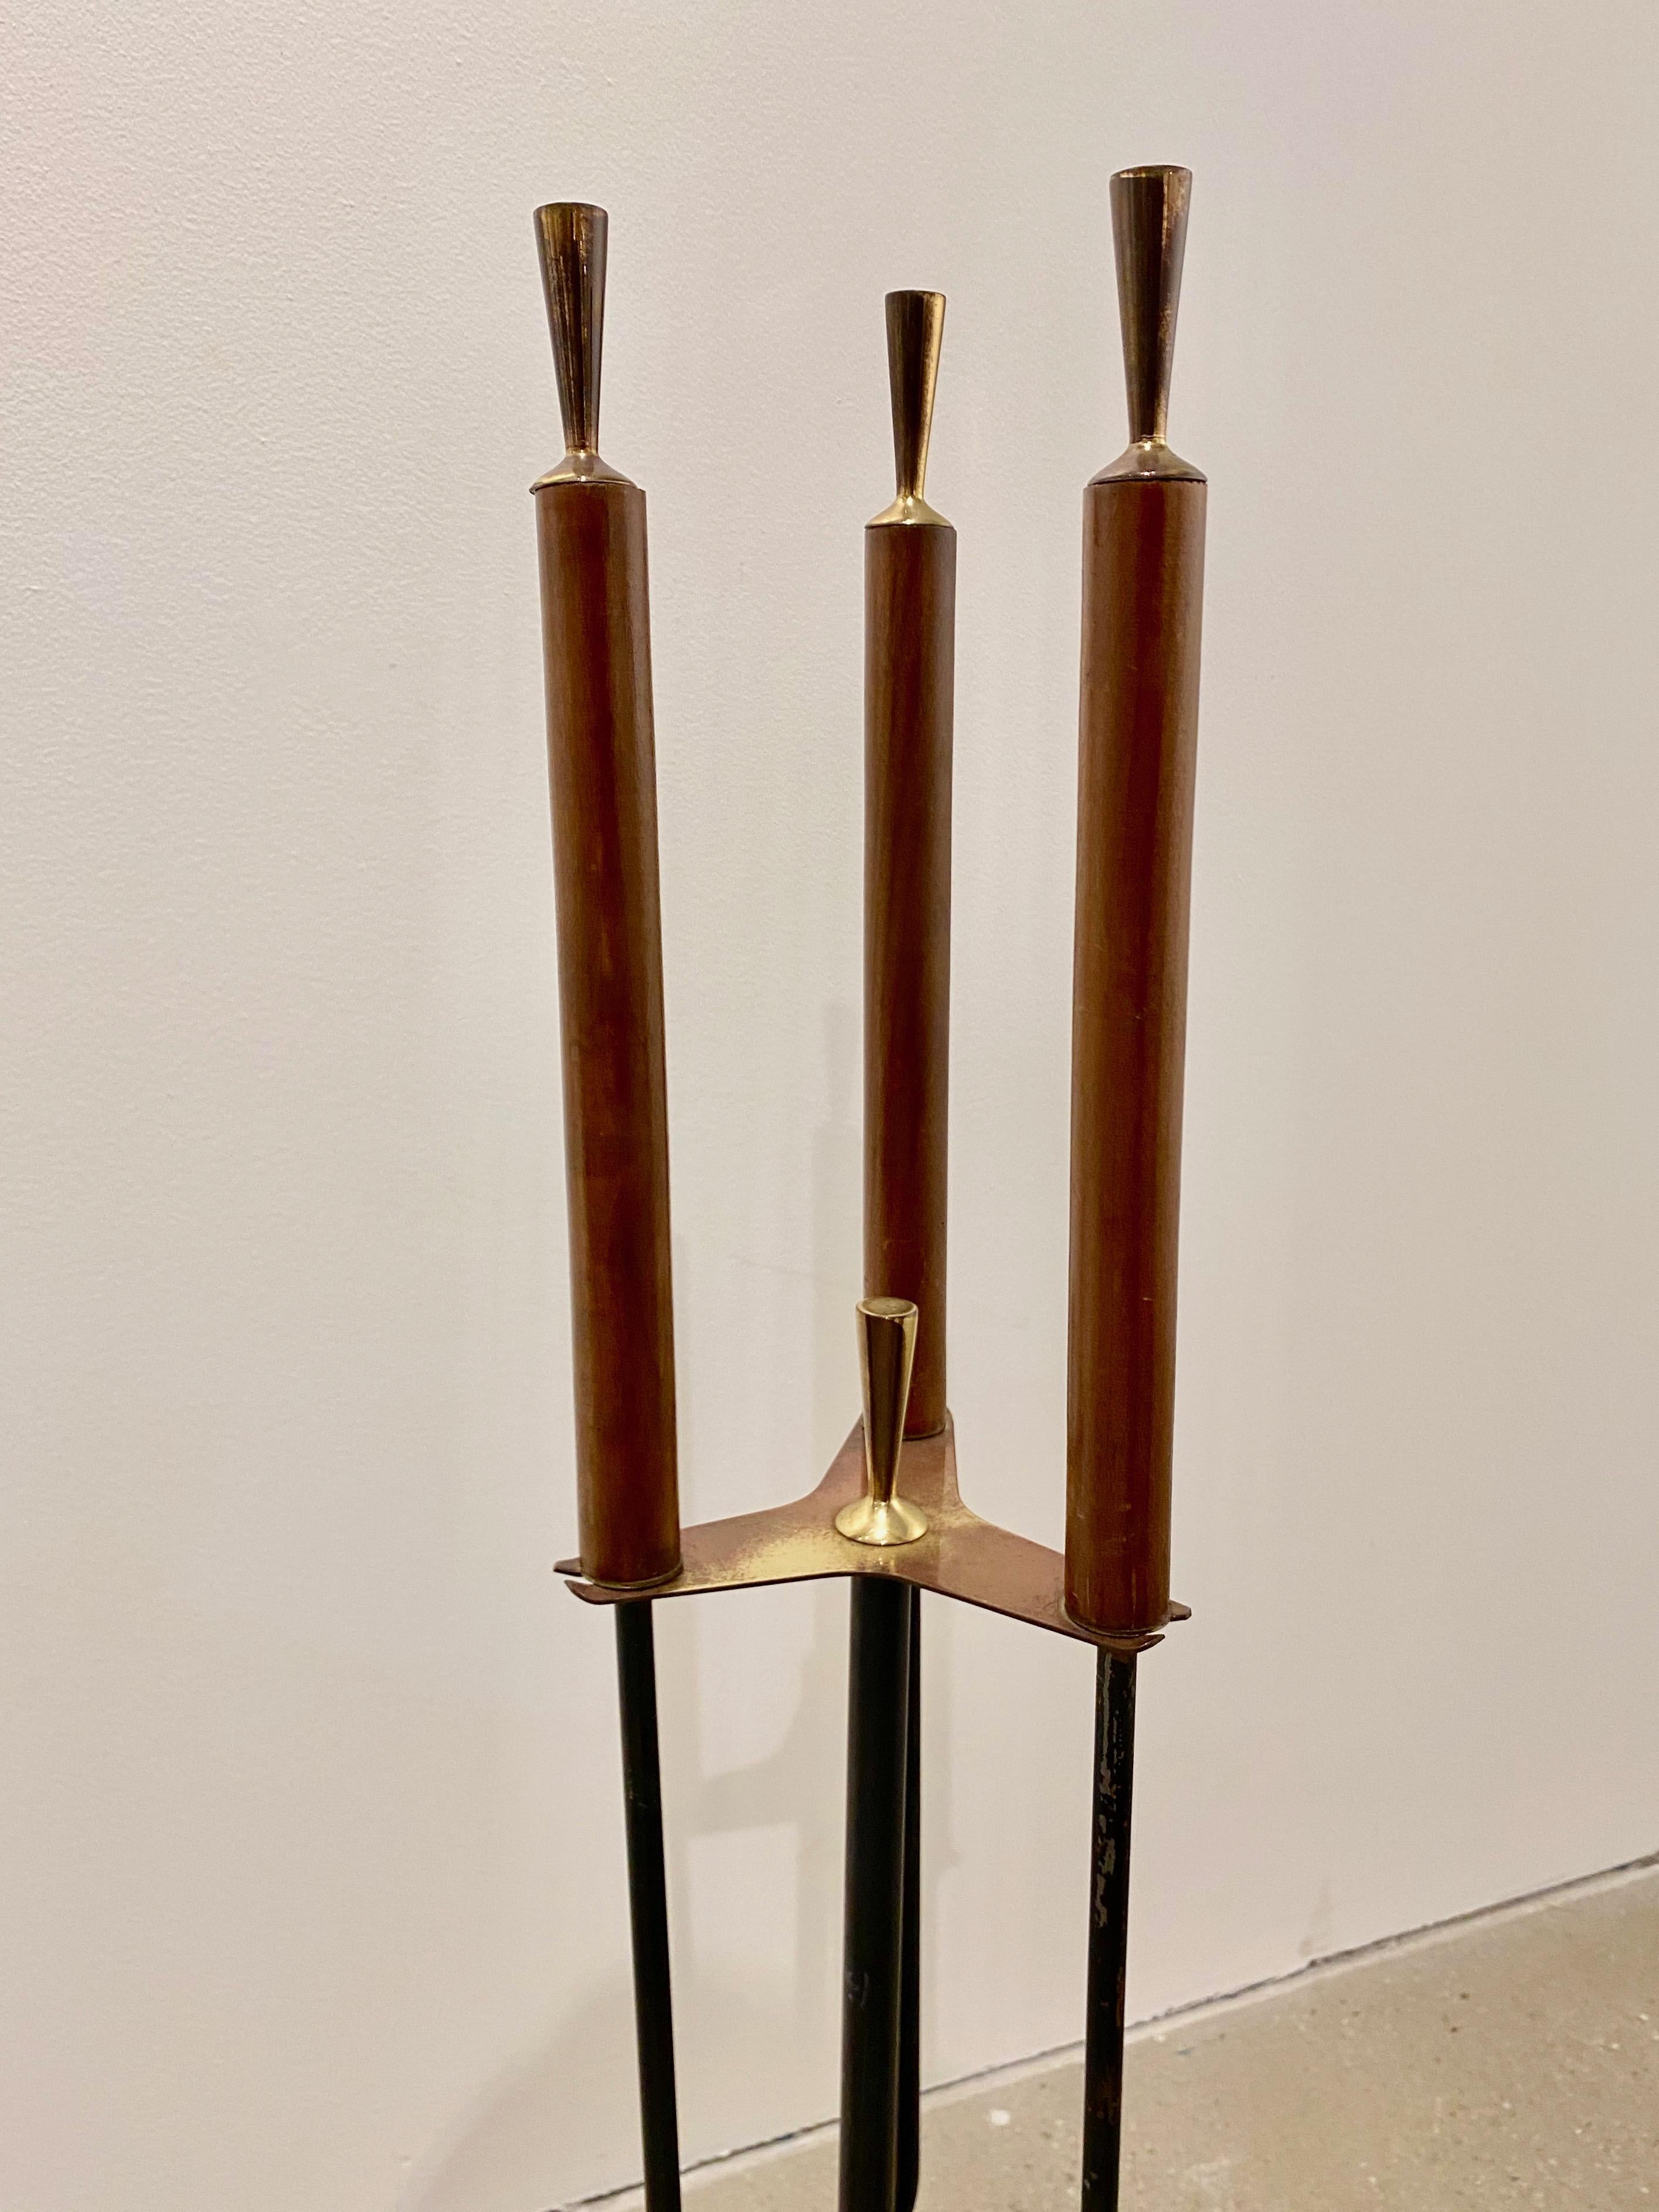 Modernist wood and brass propeller base fireplace tools.